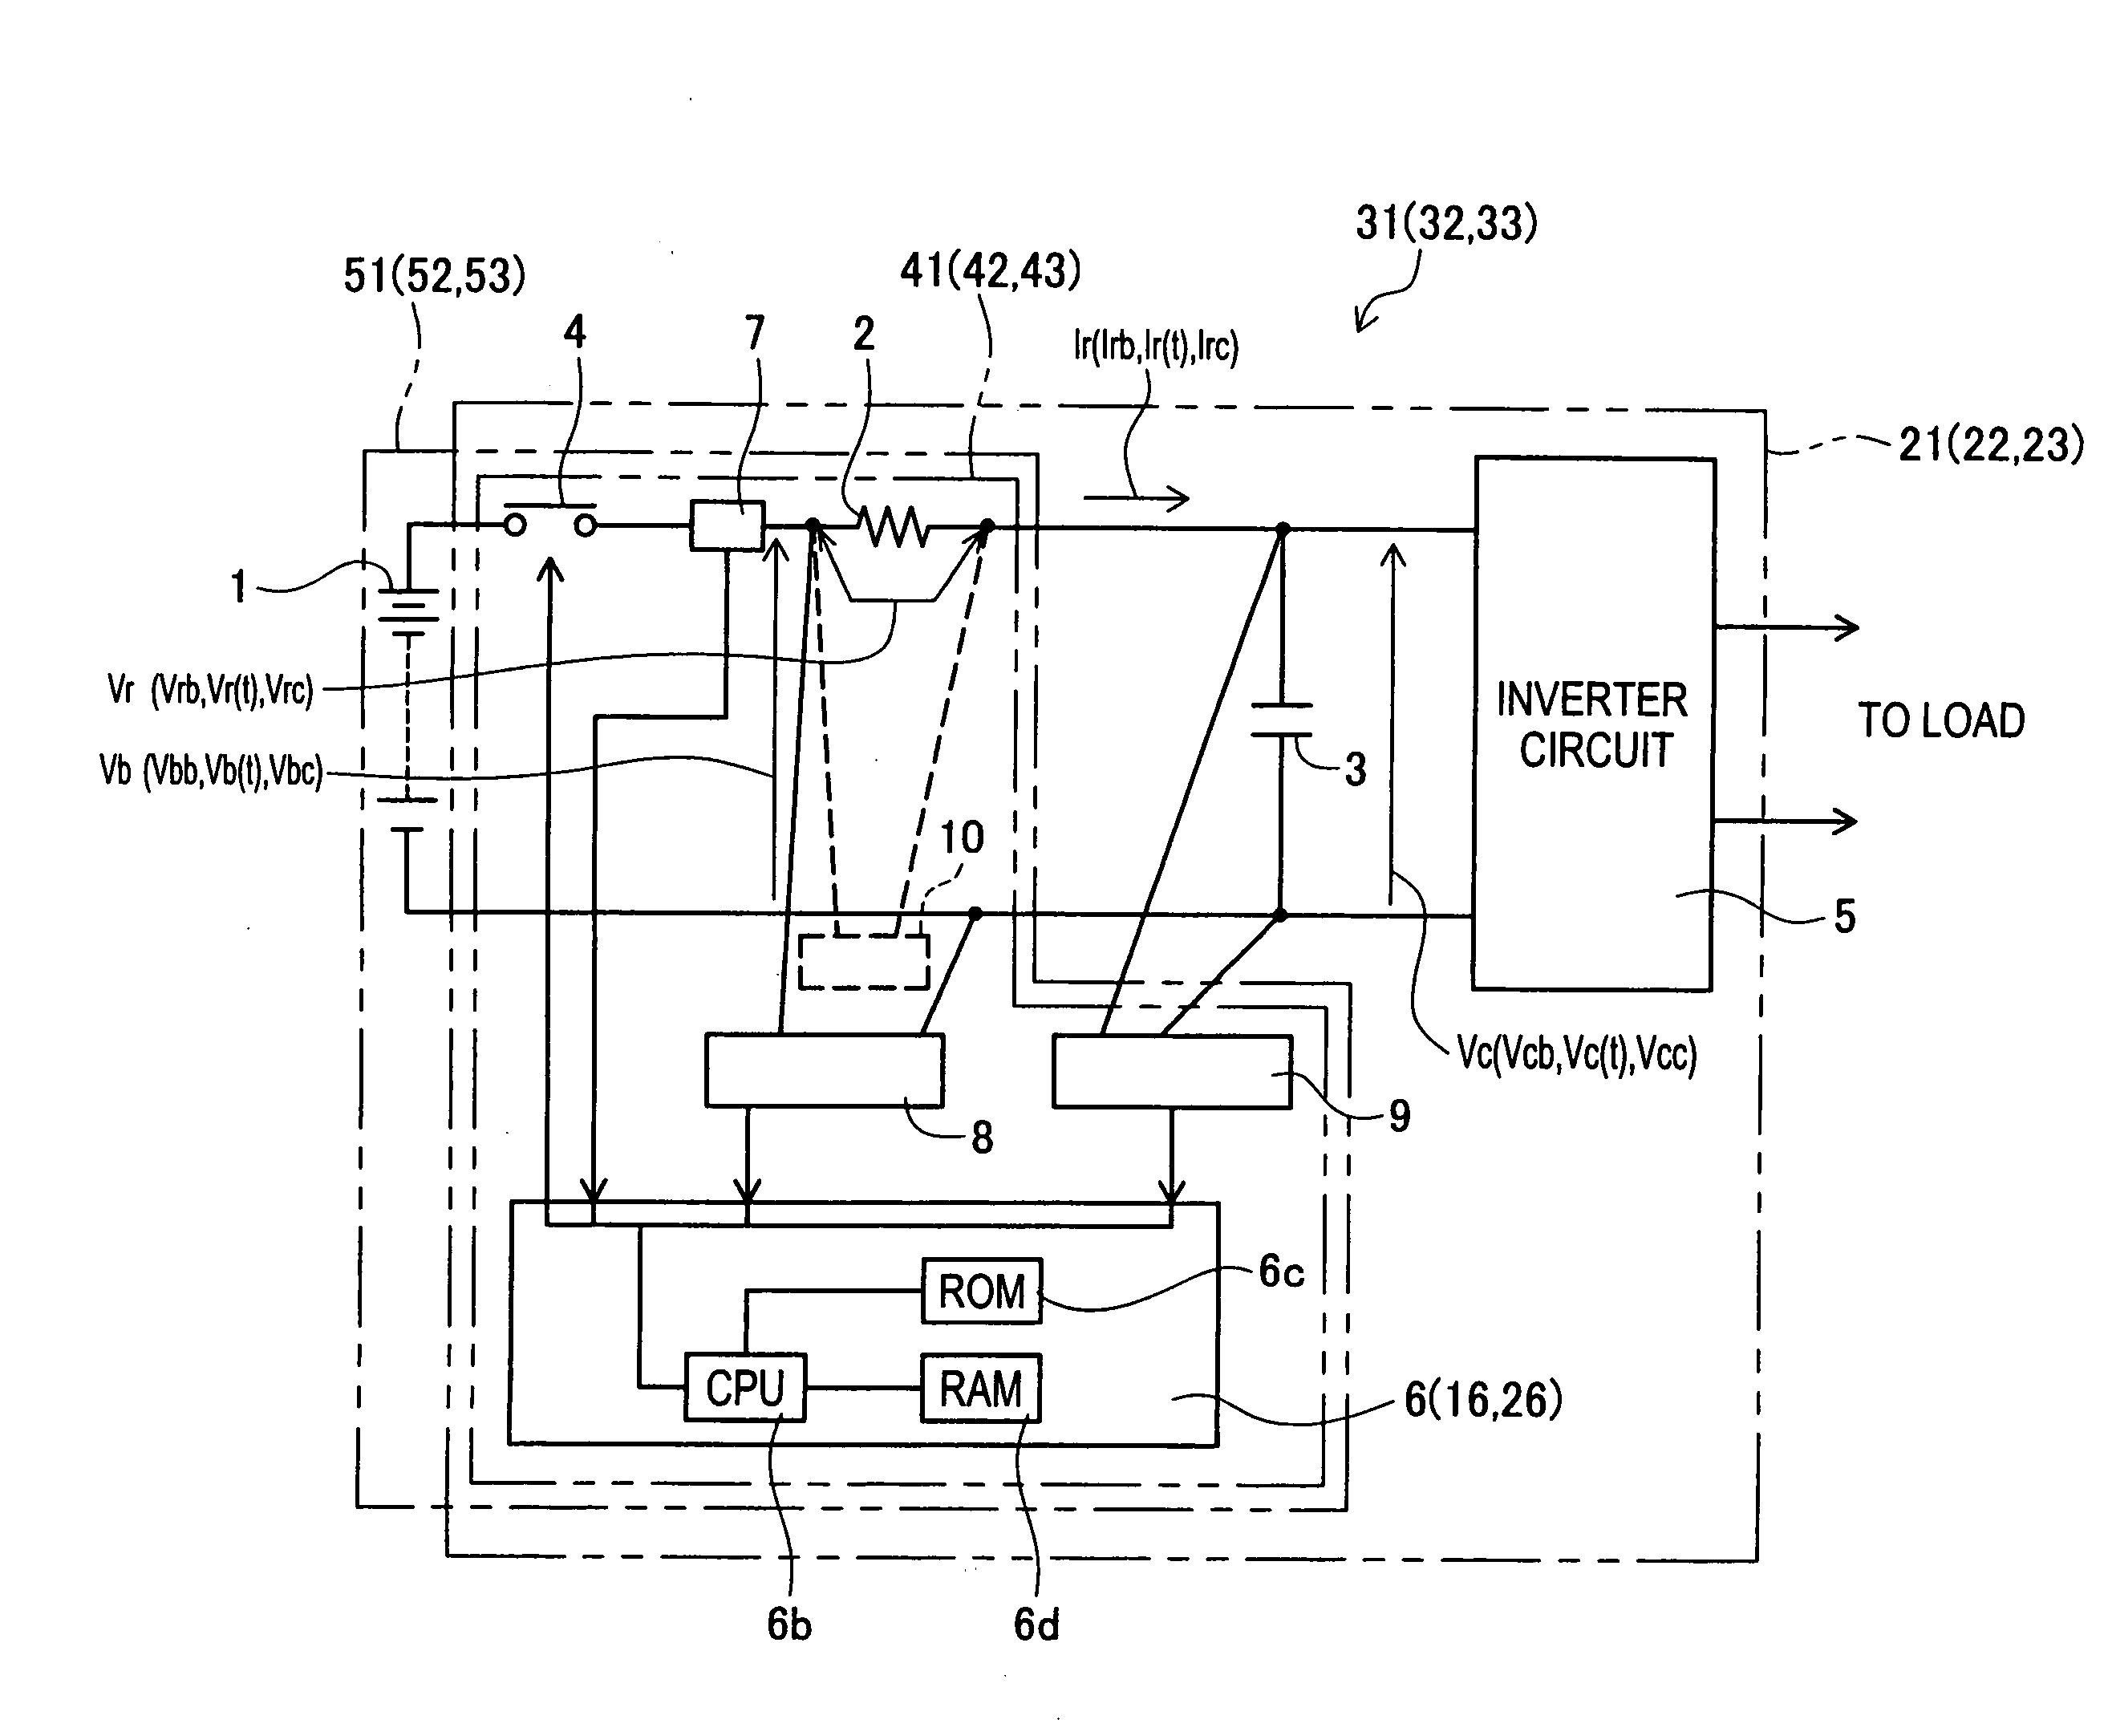 Circuit controller, inrush current limiting circuit, inrush current limiting circuit with battery, inverter, and inverter with battery